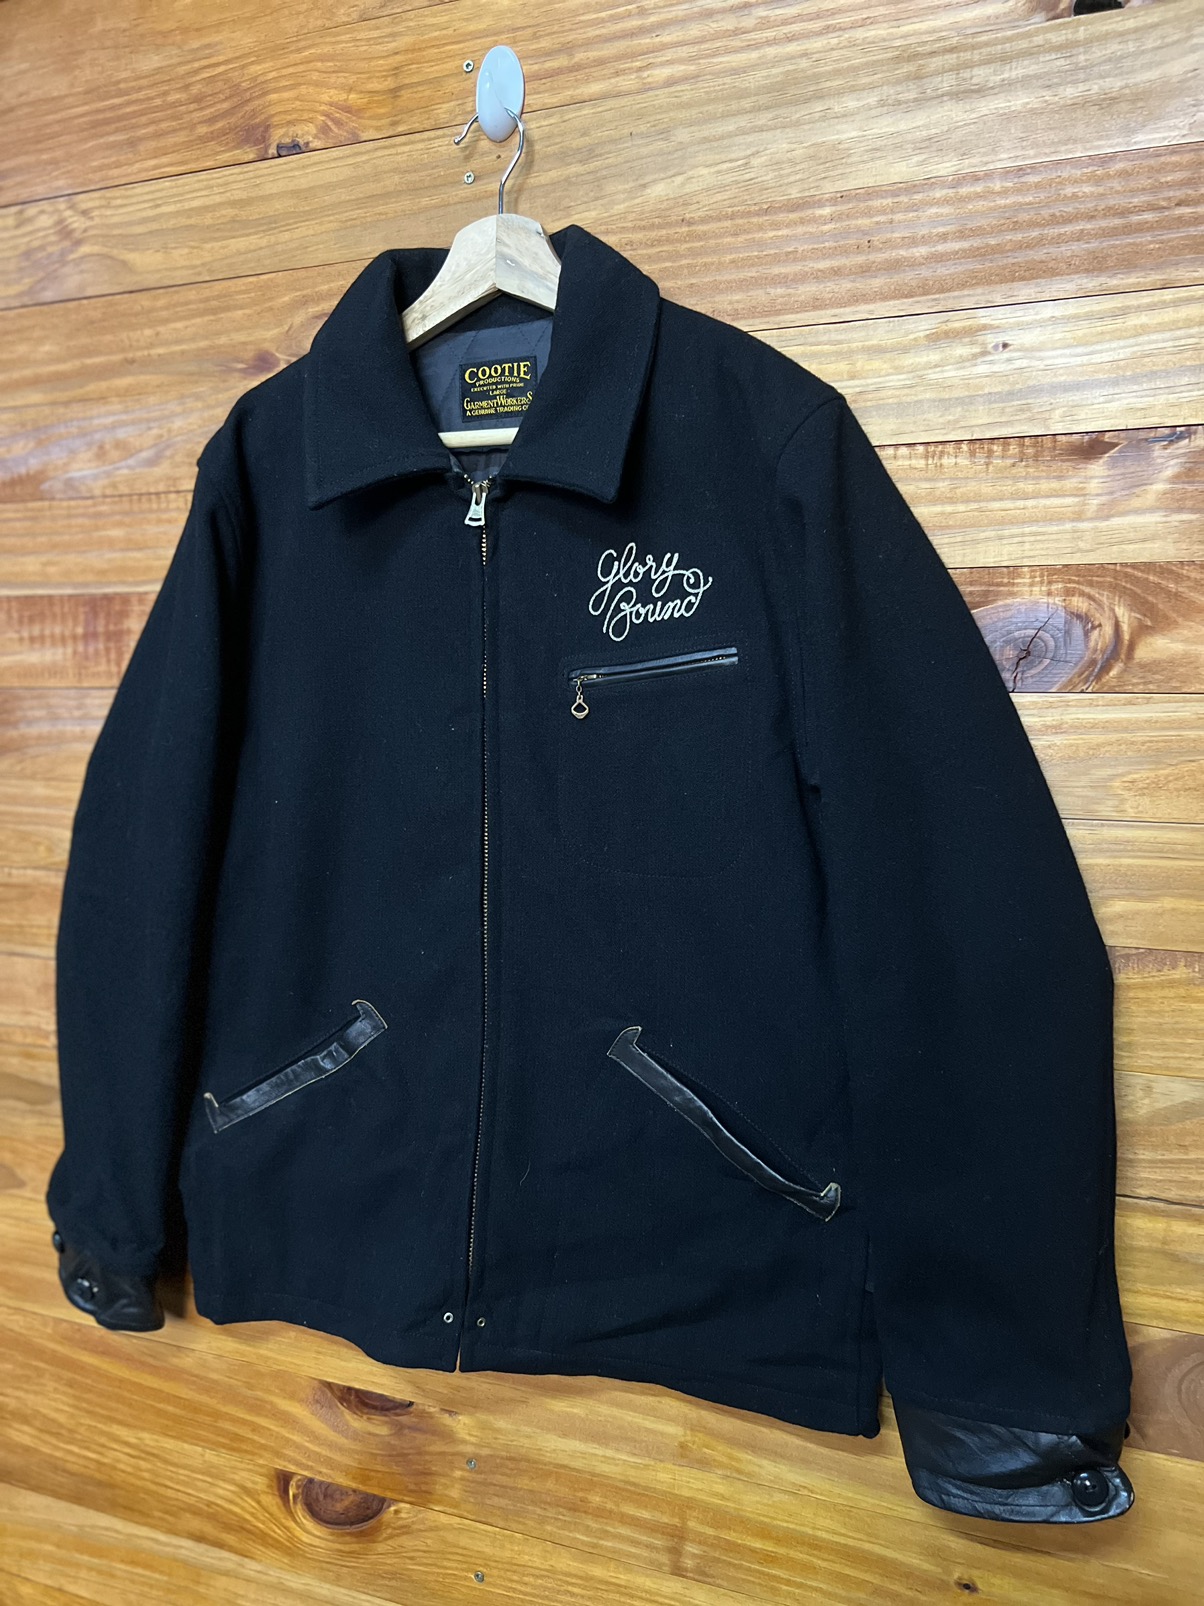 Vintage - ARCHIVE? COOTIE PRODUCTIONS GARMENT WORKERS WOOL JACKET